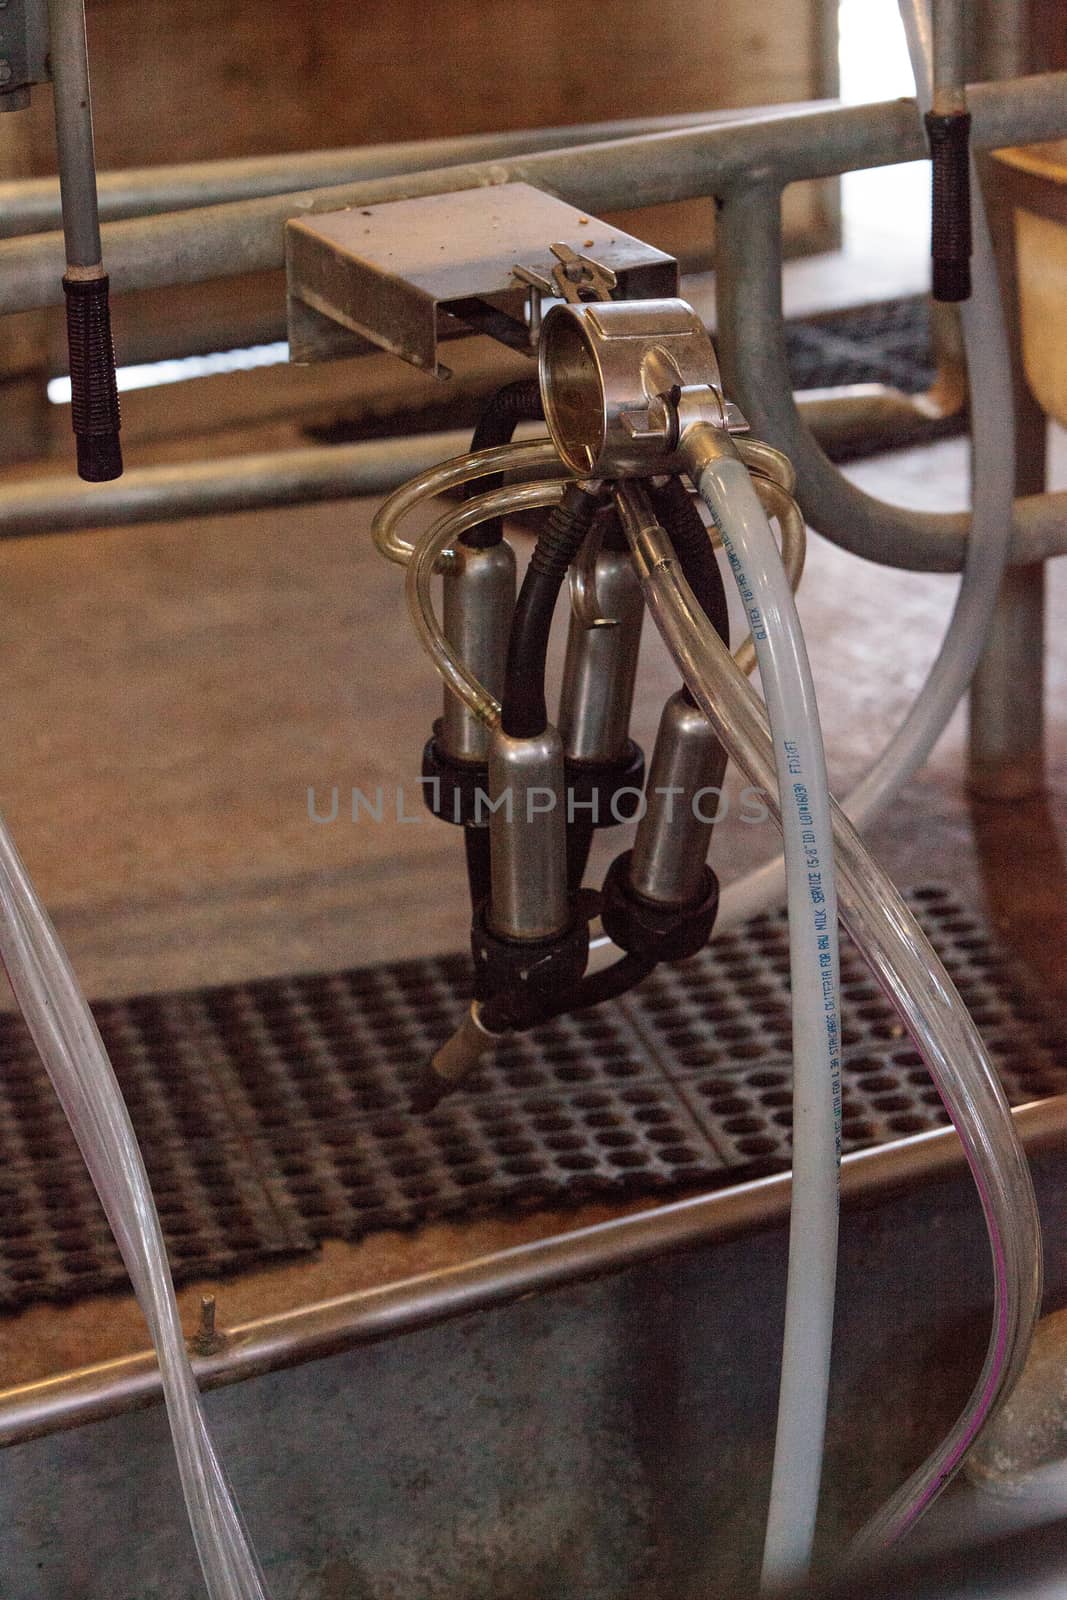 Electronic cow milking machine at a farm in a dairy barn in summer